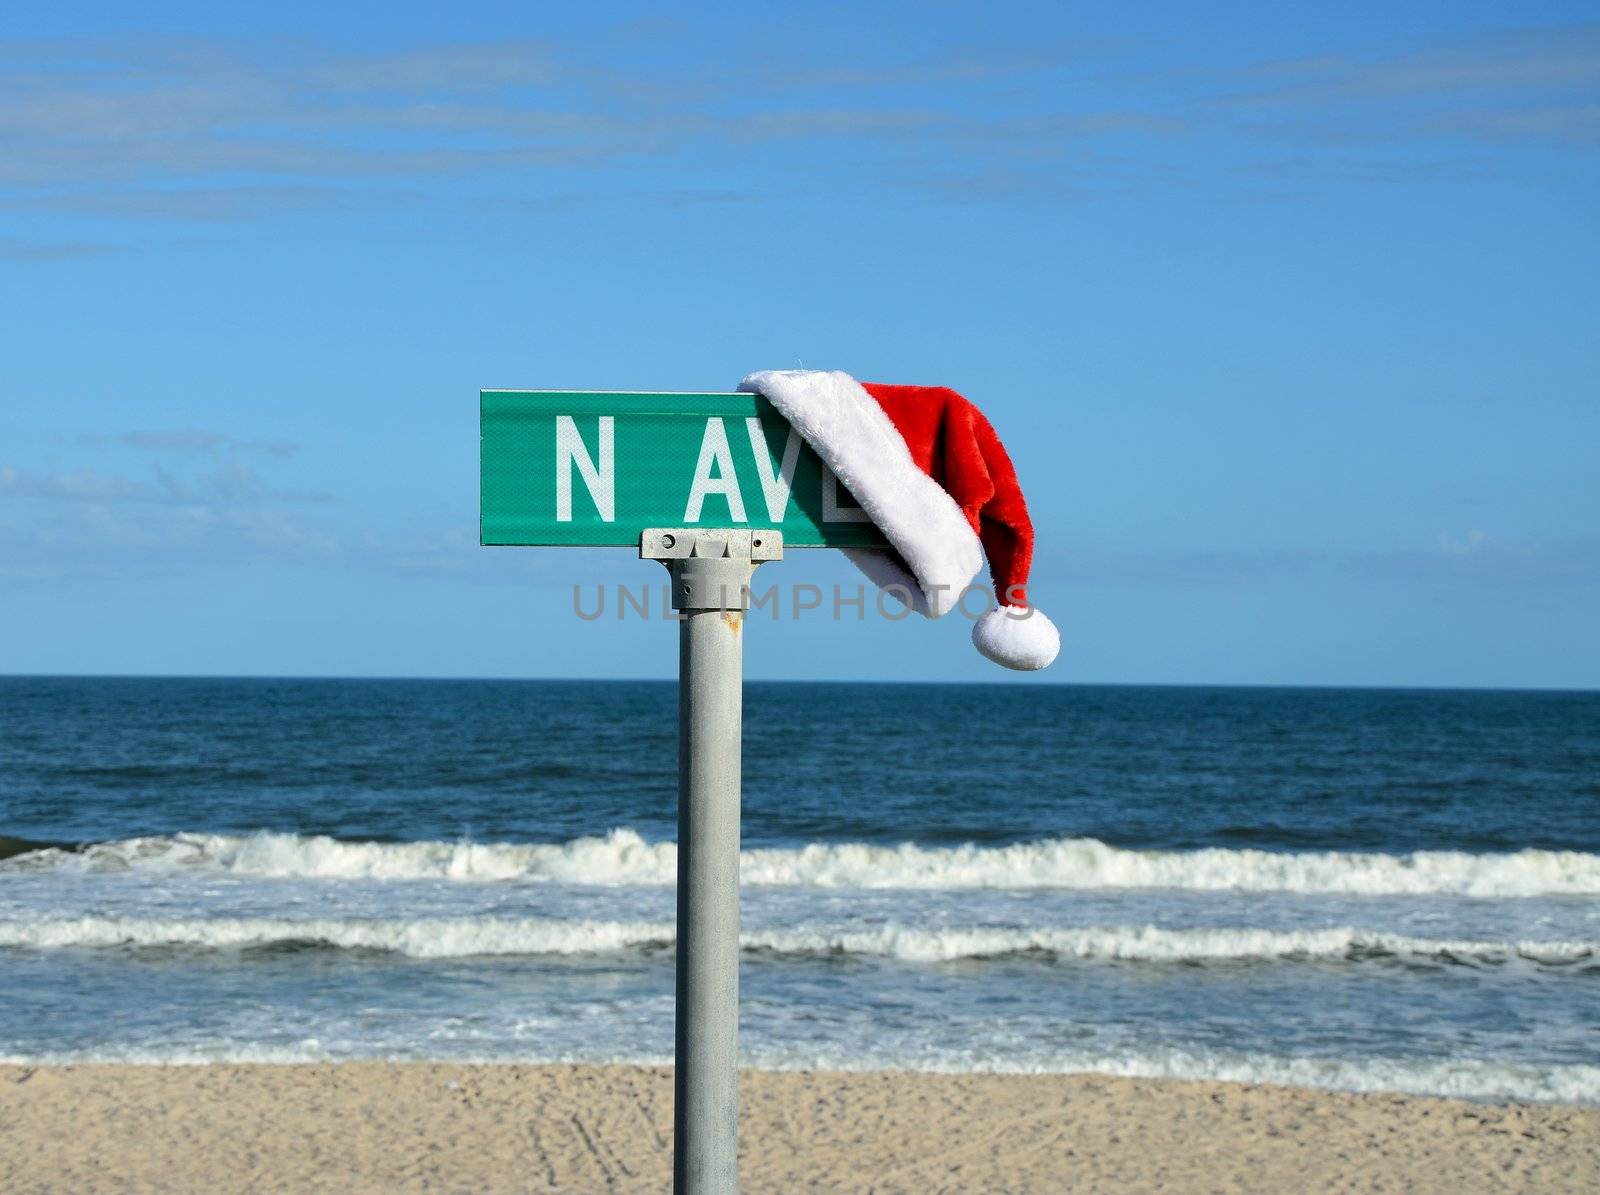 North avenue at christmas time located at the beach